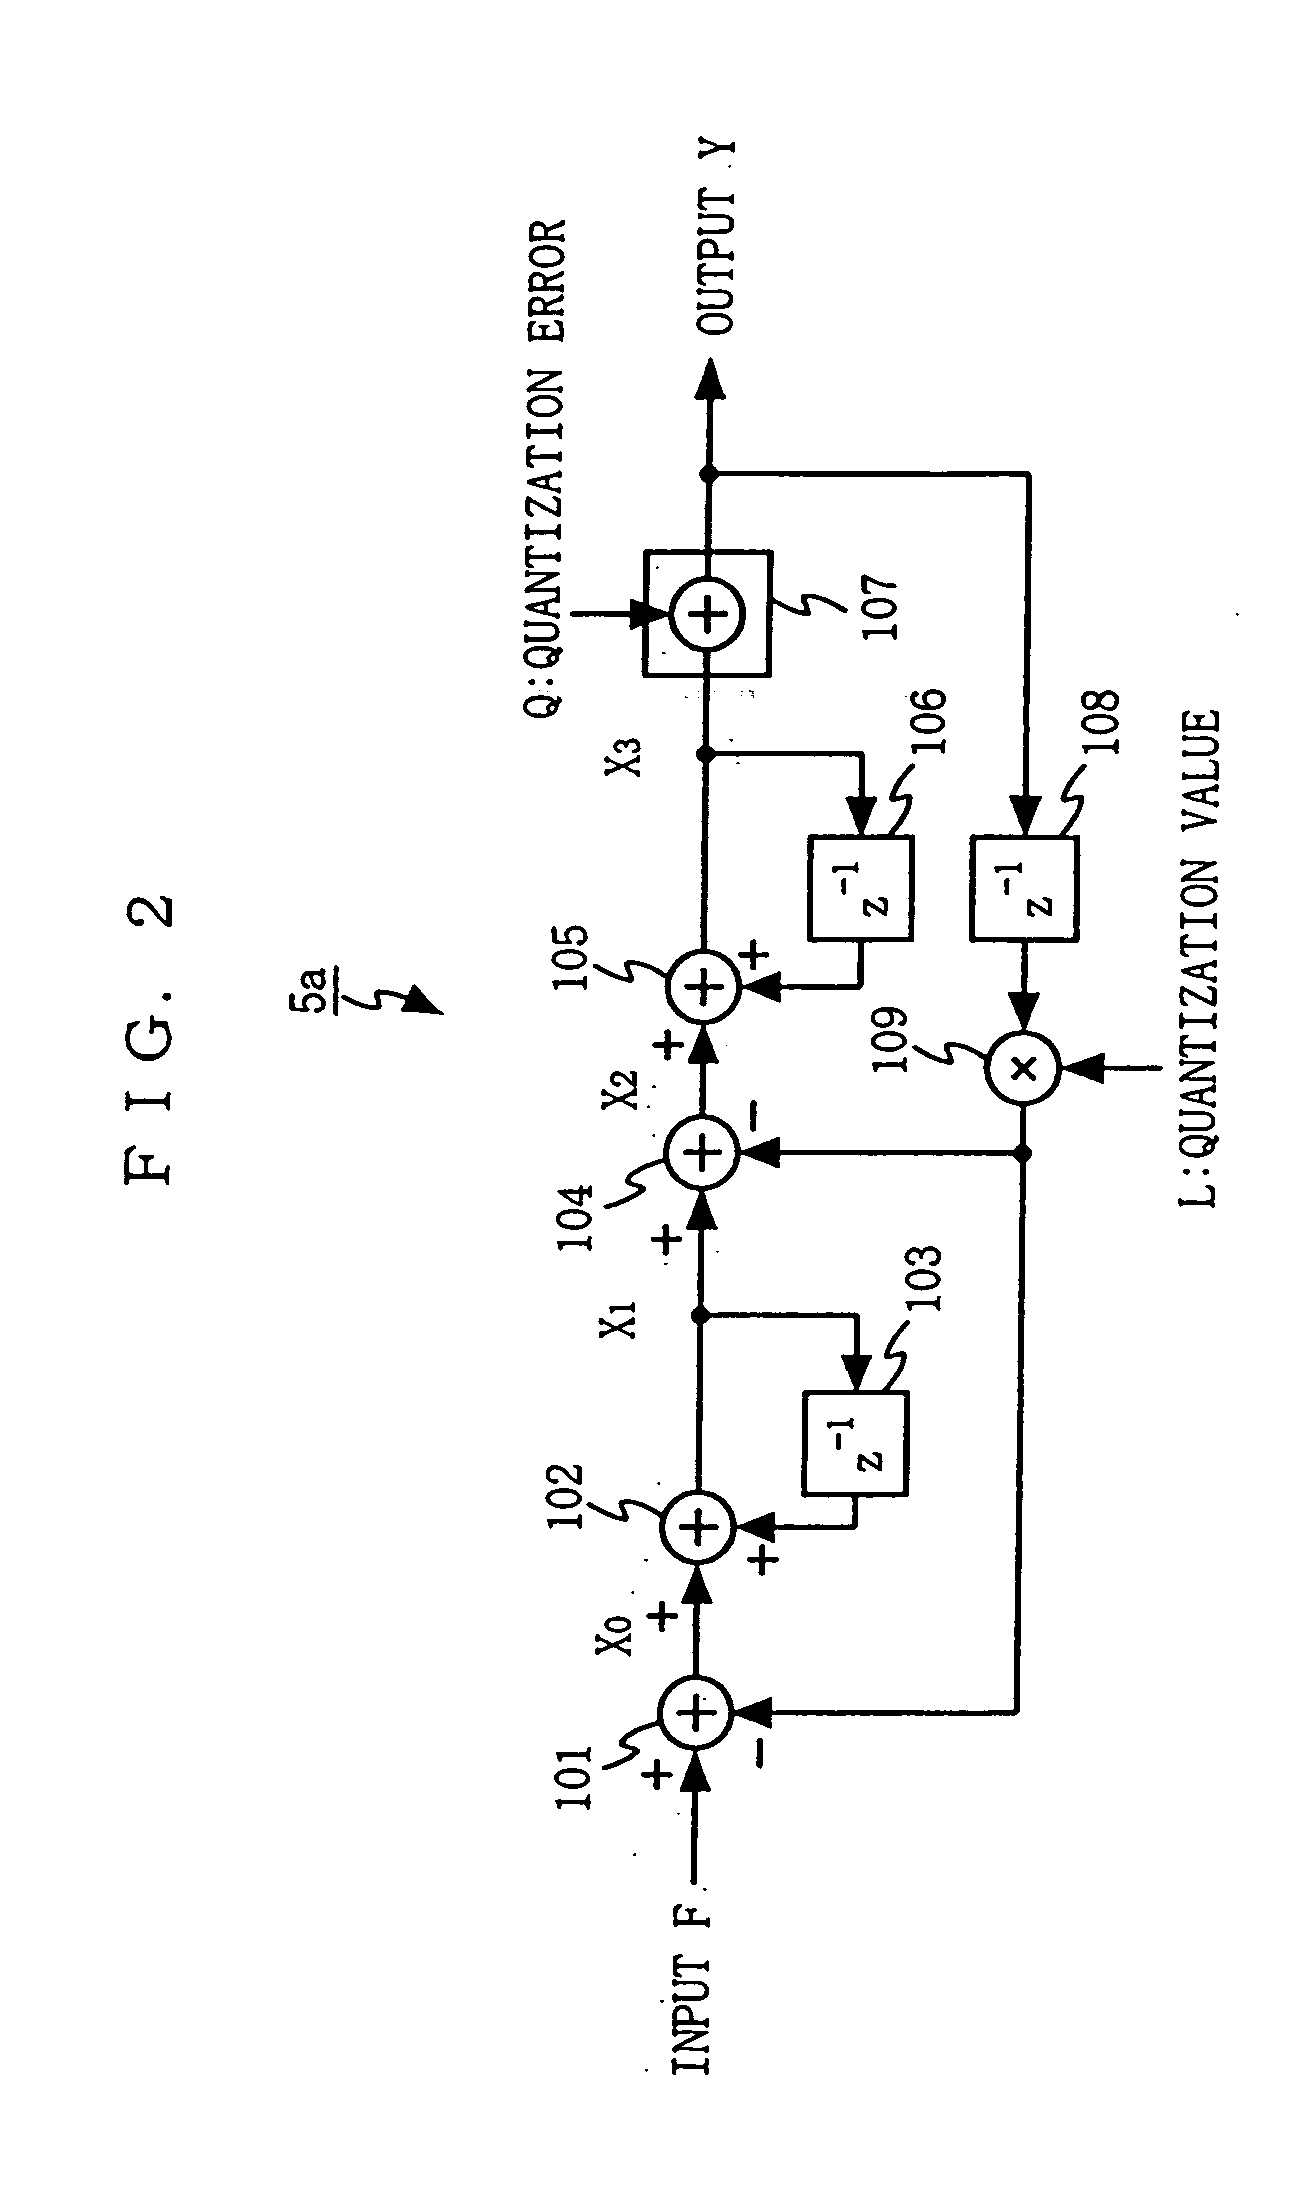 Frequency modulator, frequency modulating method, and wireless circuit